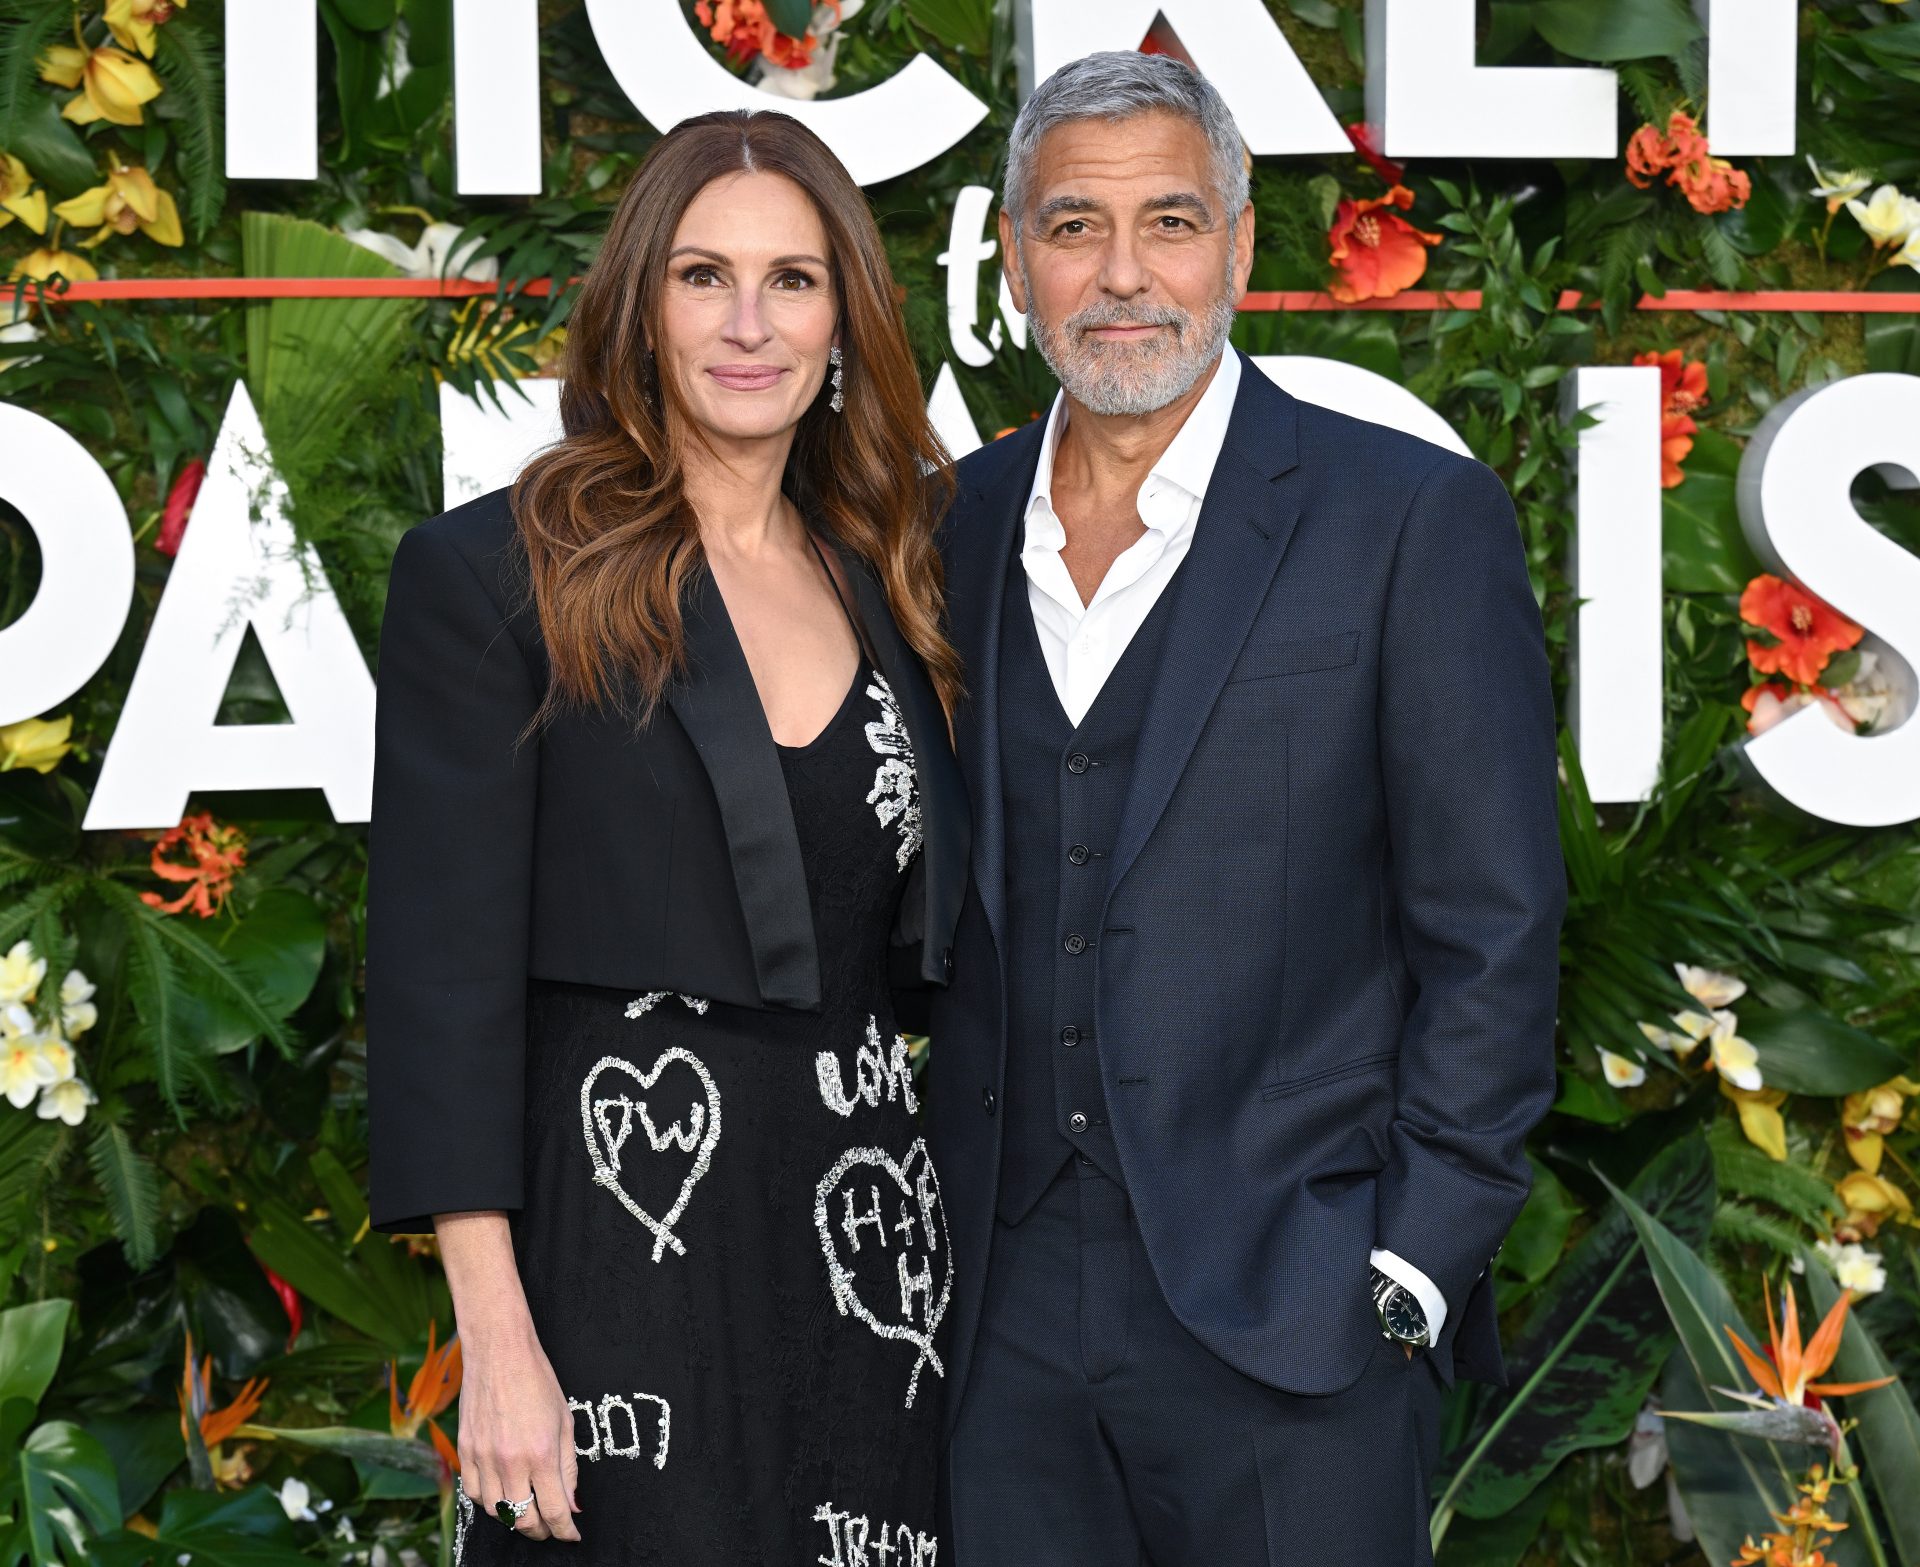 Julia Roberts, George Clooney rom-com 'Ticket to Paradise' lands